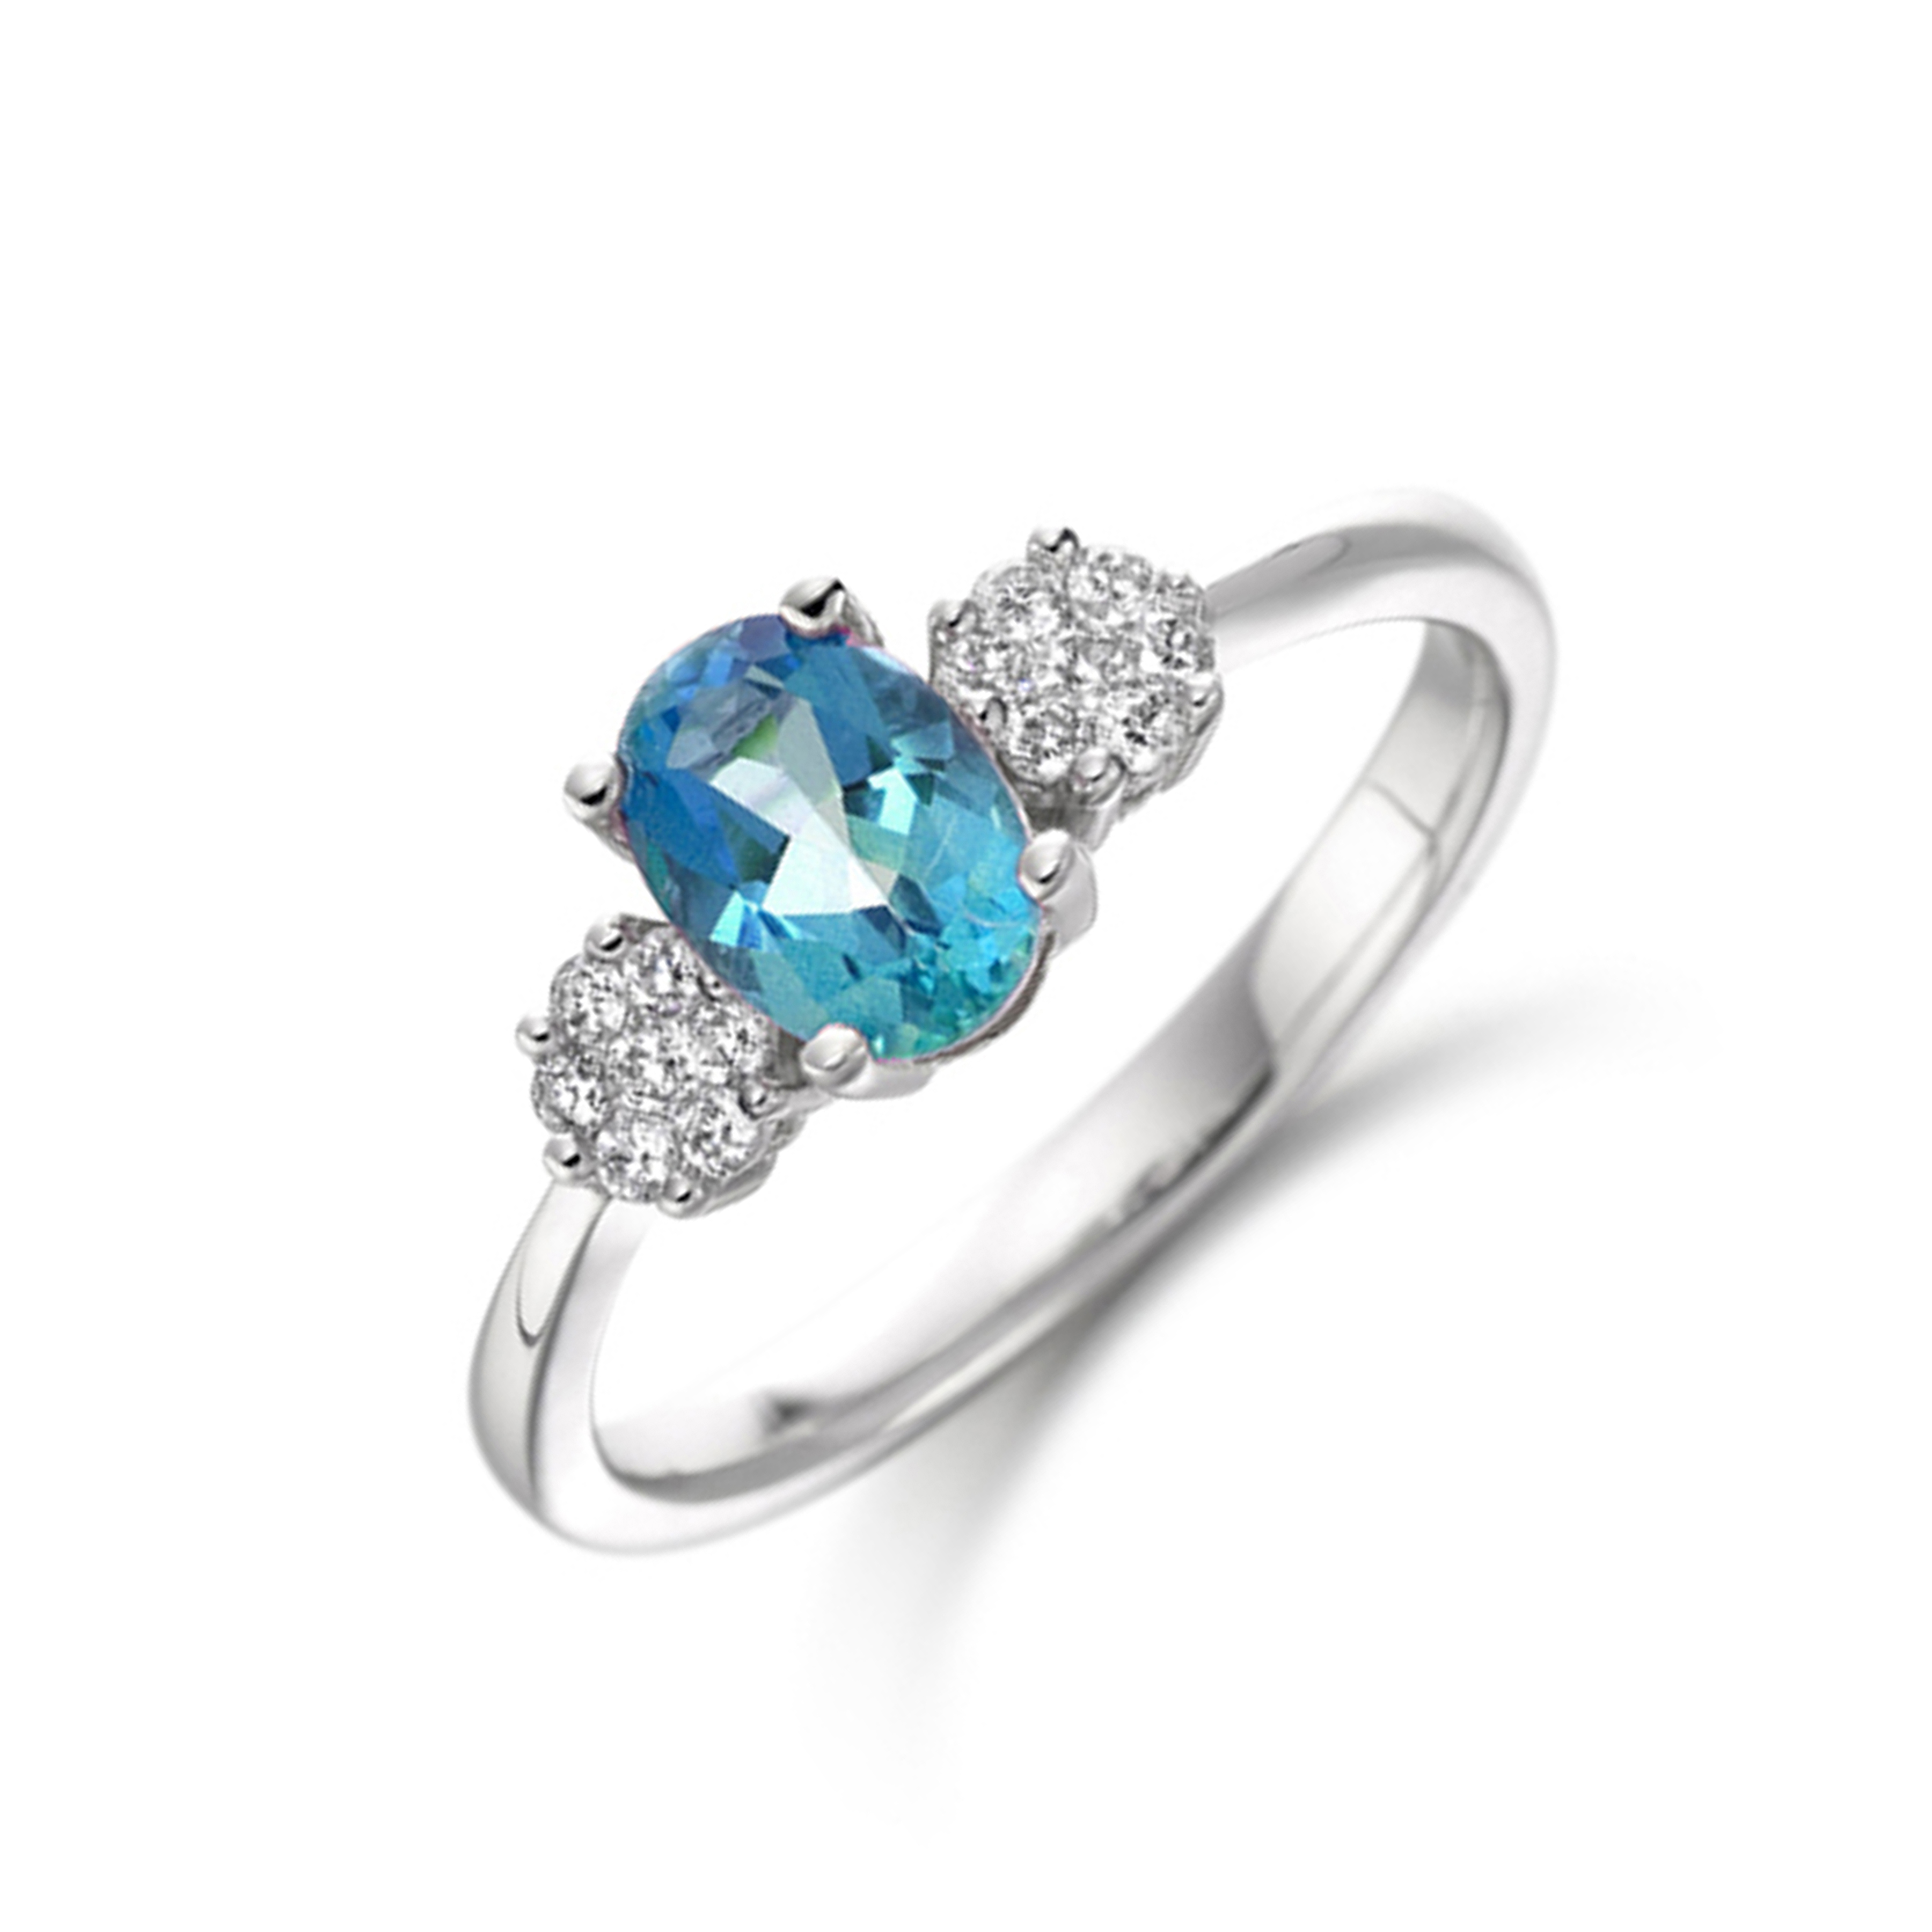 7X5mm Oval Blue Topaz Side Stone Diamond And Gemstone Engagement Ring